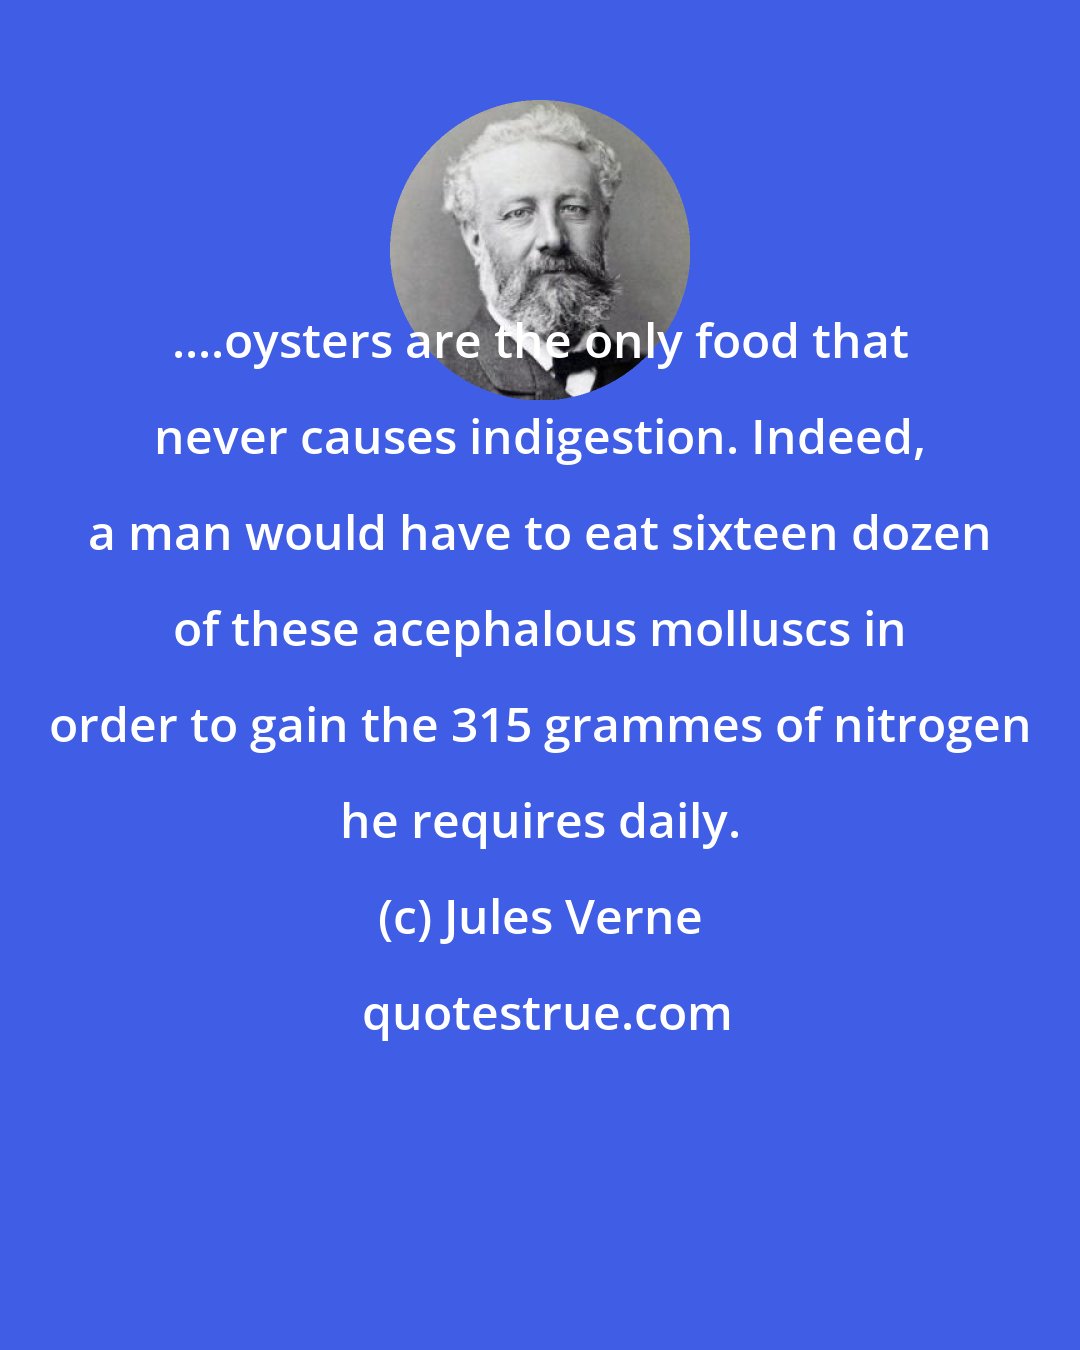 Jules Verne: ....oysters are the only food that never causes indigestion. Indeed, a man would have to eat sixteen dozen of these acephalous molluscs in order to gain the 315 grammes of nitrogen he requires daily.